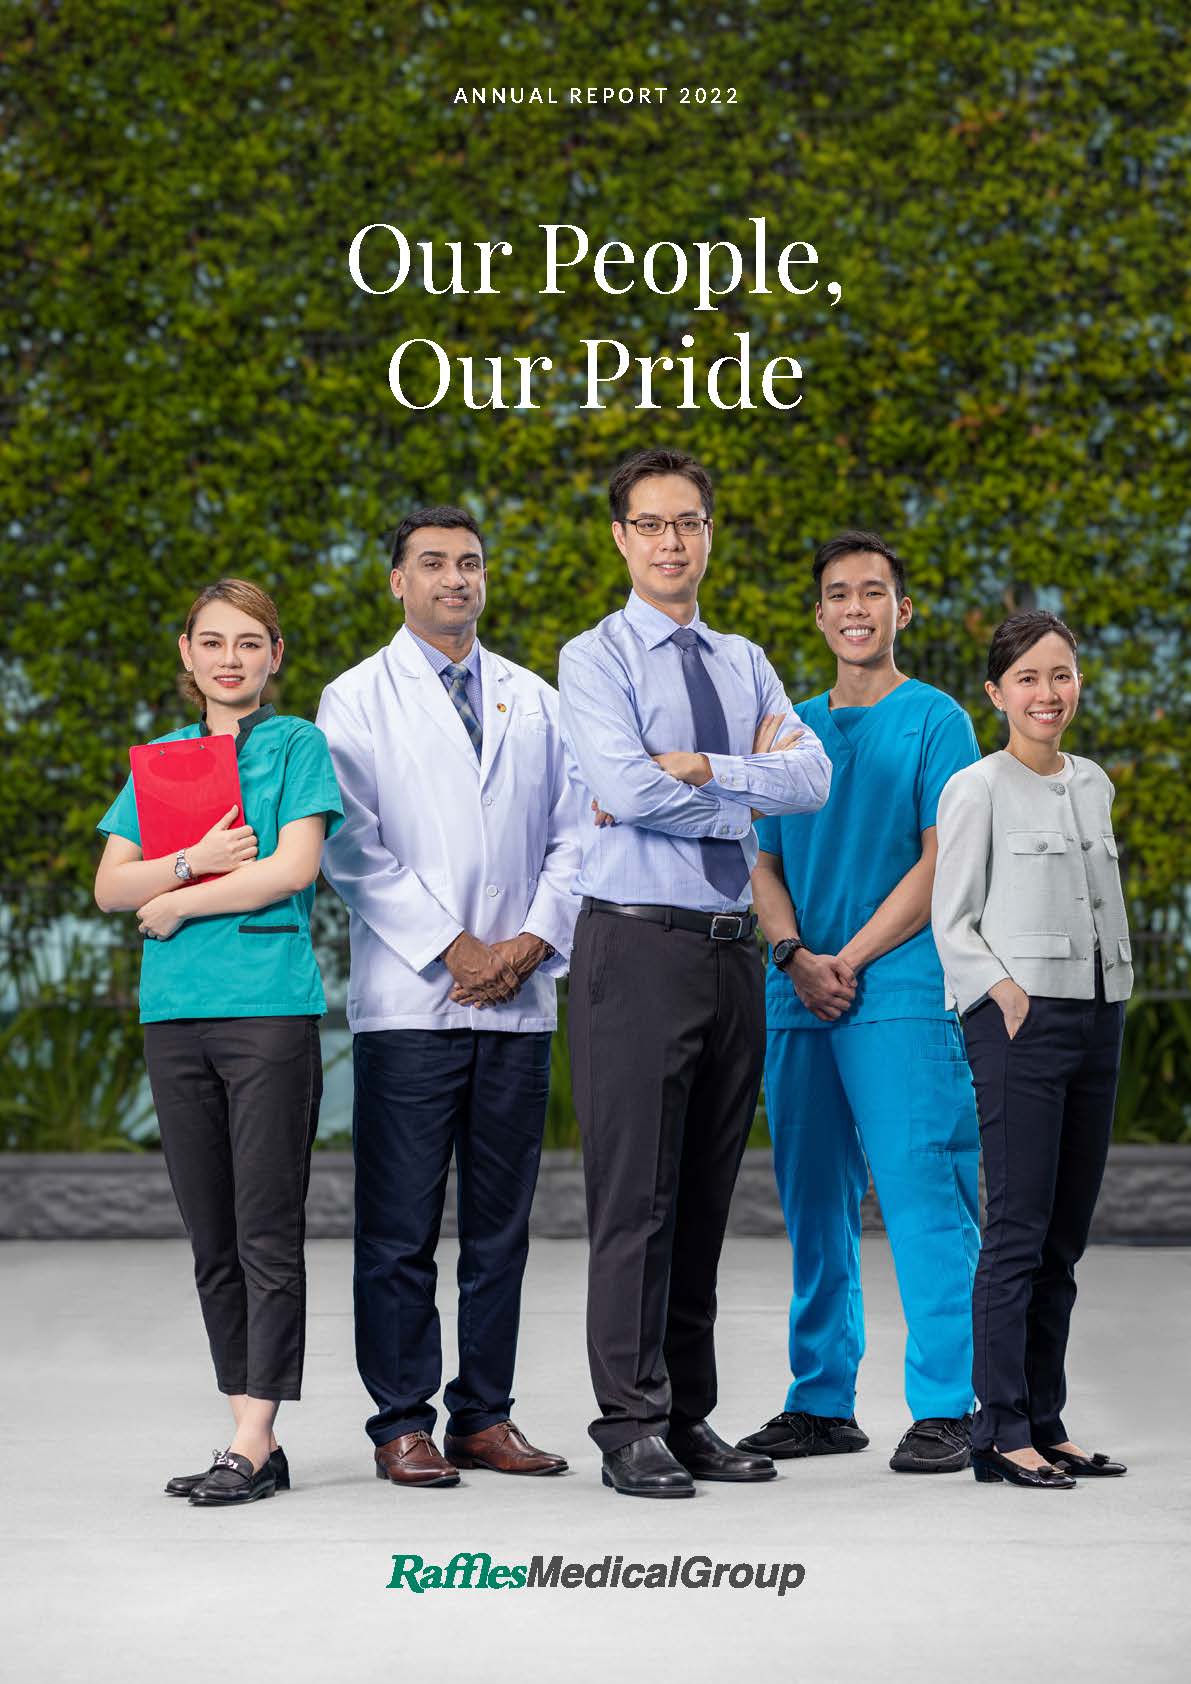 raffles medical group annual report 2022 - Our people Our Pride